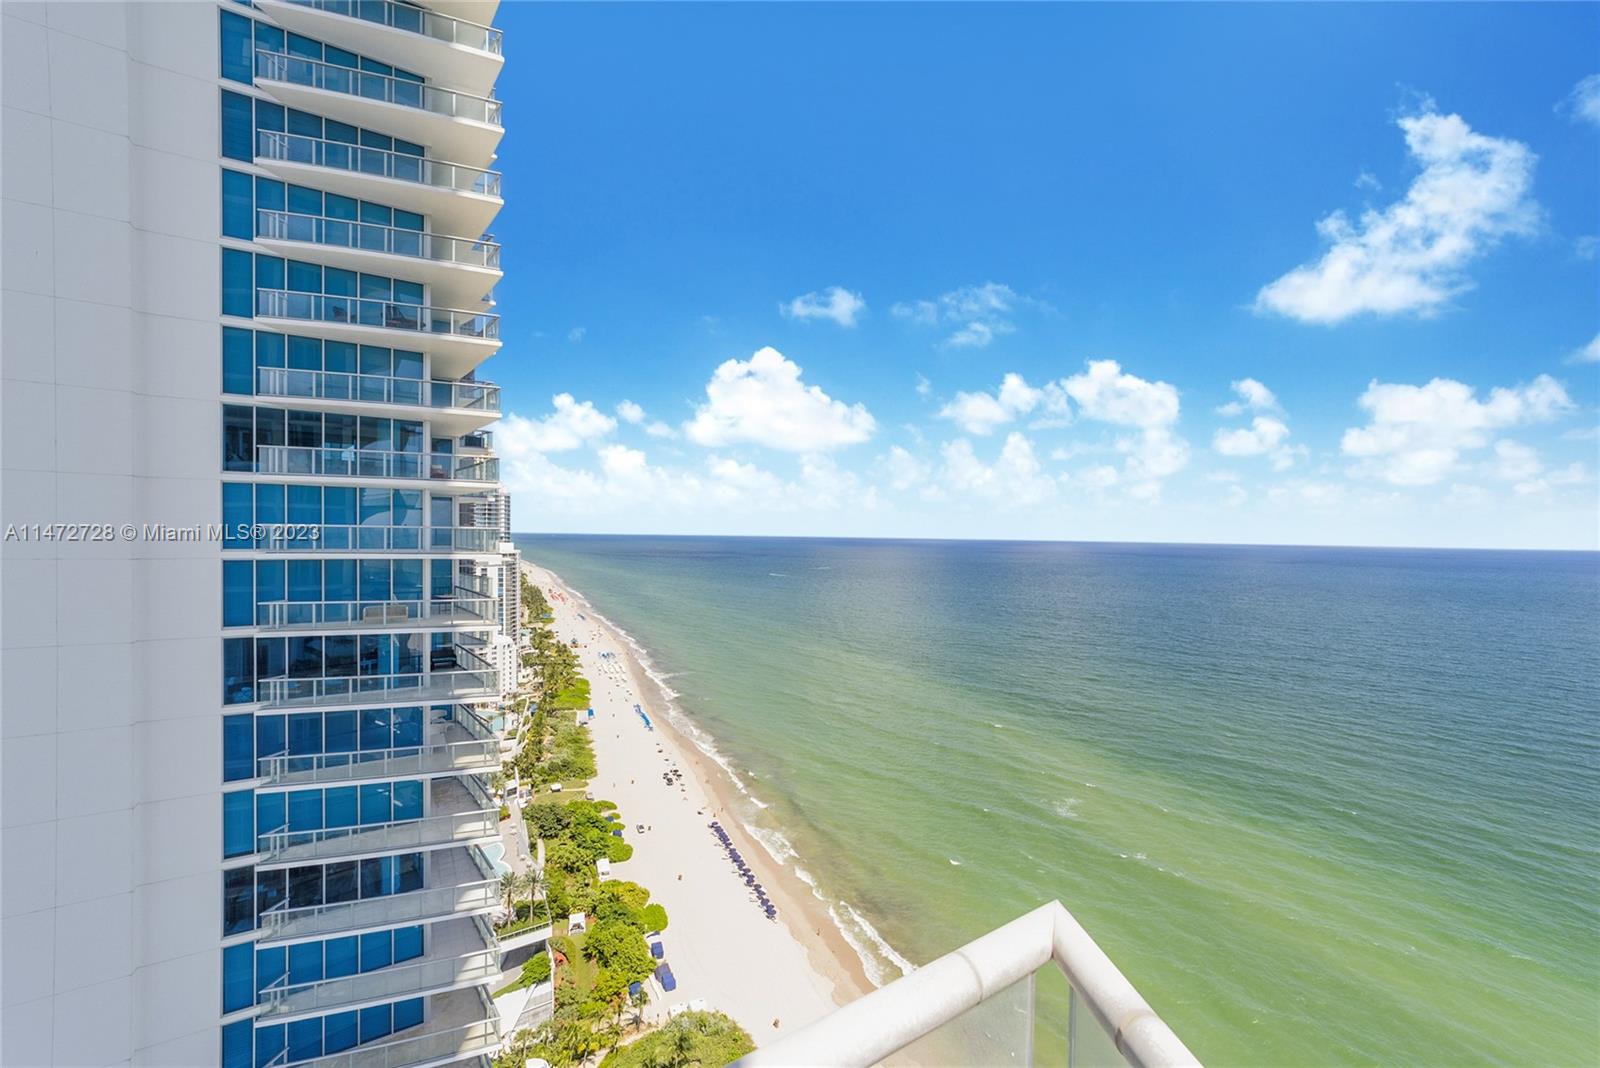 Enjoy this spectacular ocean front view, beautiful corner unit with natural sunlight in Jade Signature  one of the most prestigious buildings in Sunny Isle Beach. Designed by Pritzker Prize-winning Swiss architects, Herzog & De Meuron. Italian flooring, automatic blinds through the unit with impact floor to ceiling windows and doors. 4 bedrooms each bedroom with its own bathroom and balcony. The building provides the best resort style amenities such as fully service spa, saloon and outdoor water therapy terrace, world class restaurant and bar, fitness facility with sunset yoga deck, pilates/spin studio, spa/tub, private beach pavilion, children sensory room, clubroom, business center, amazing heated beach front pool and more.